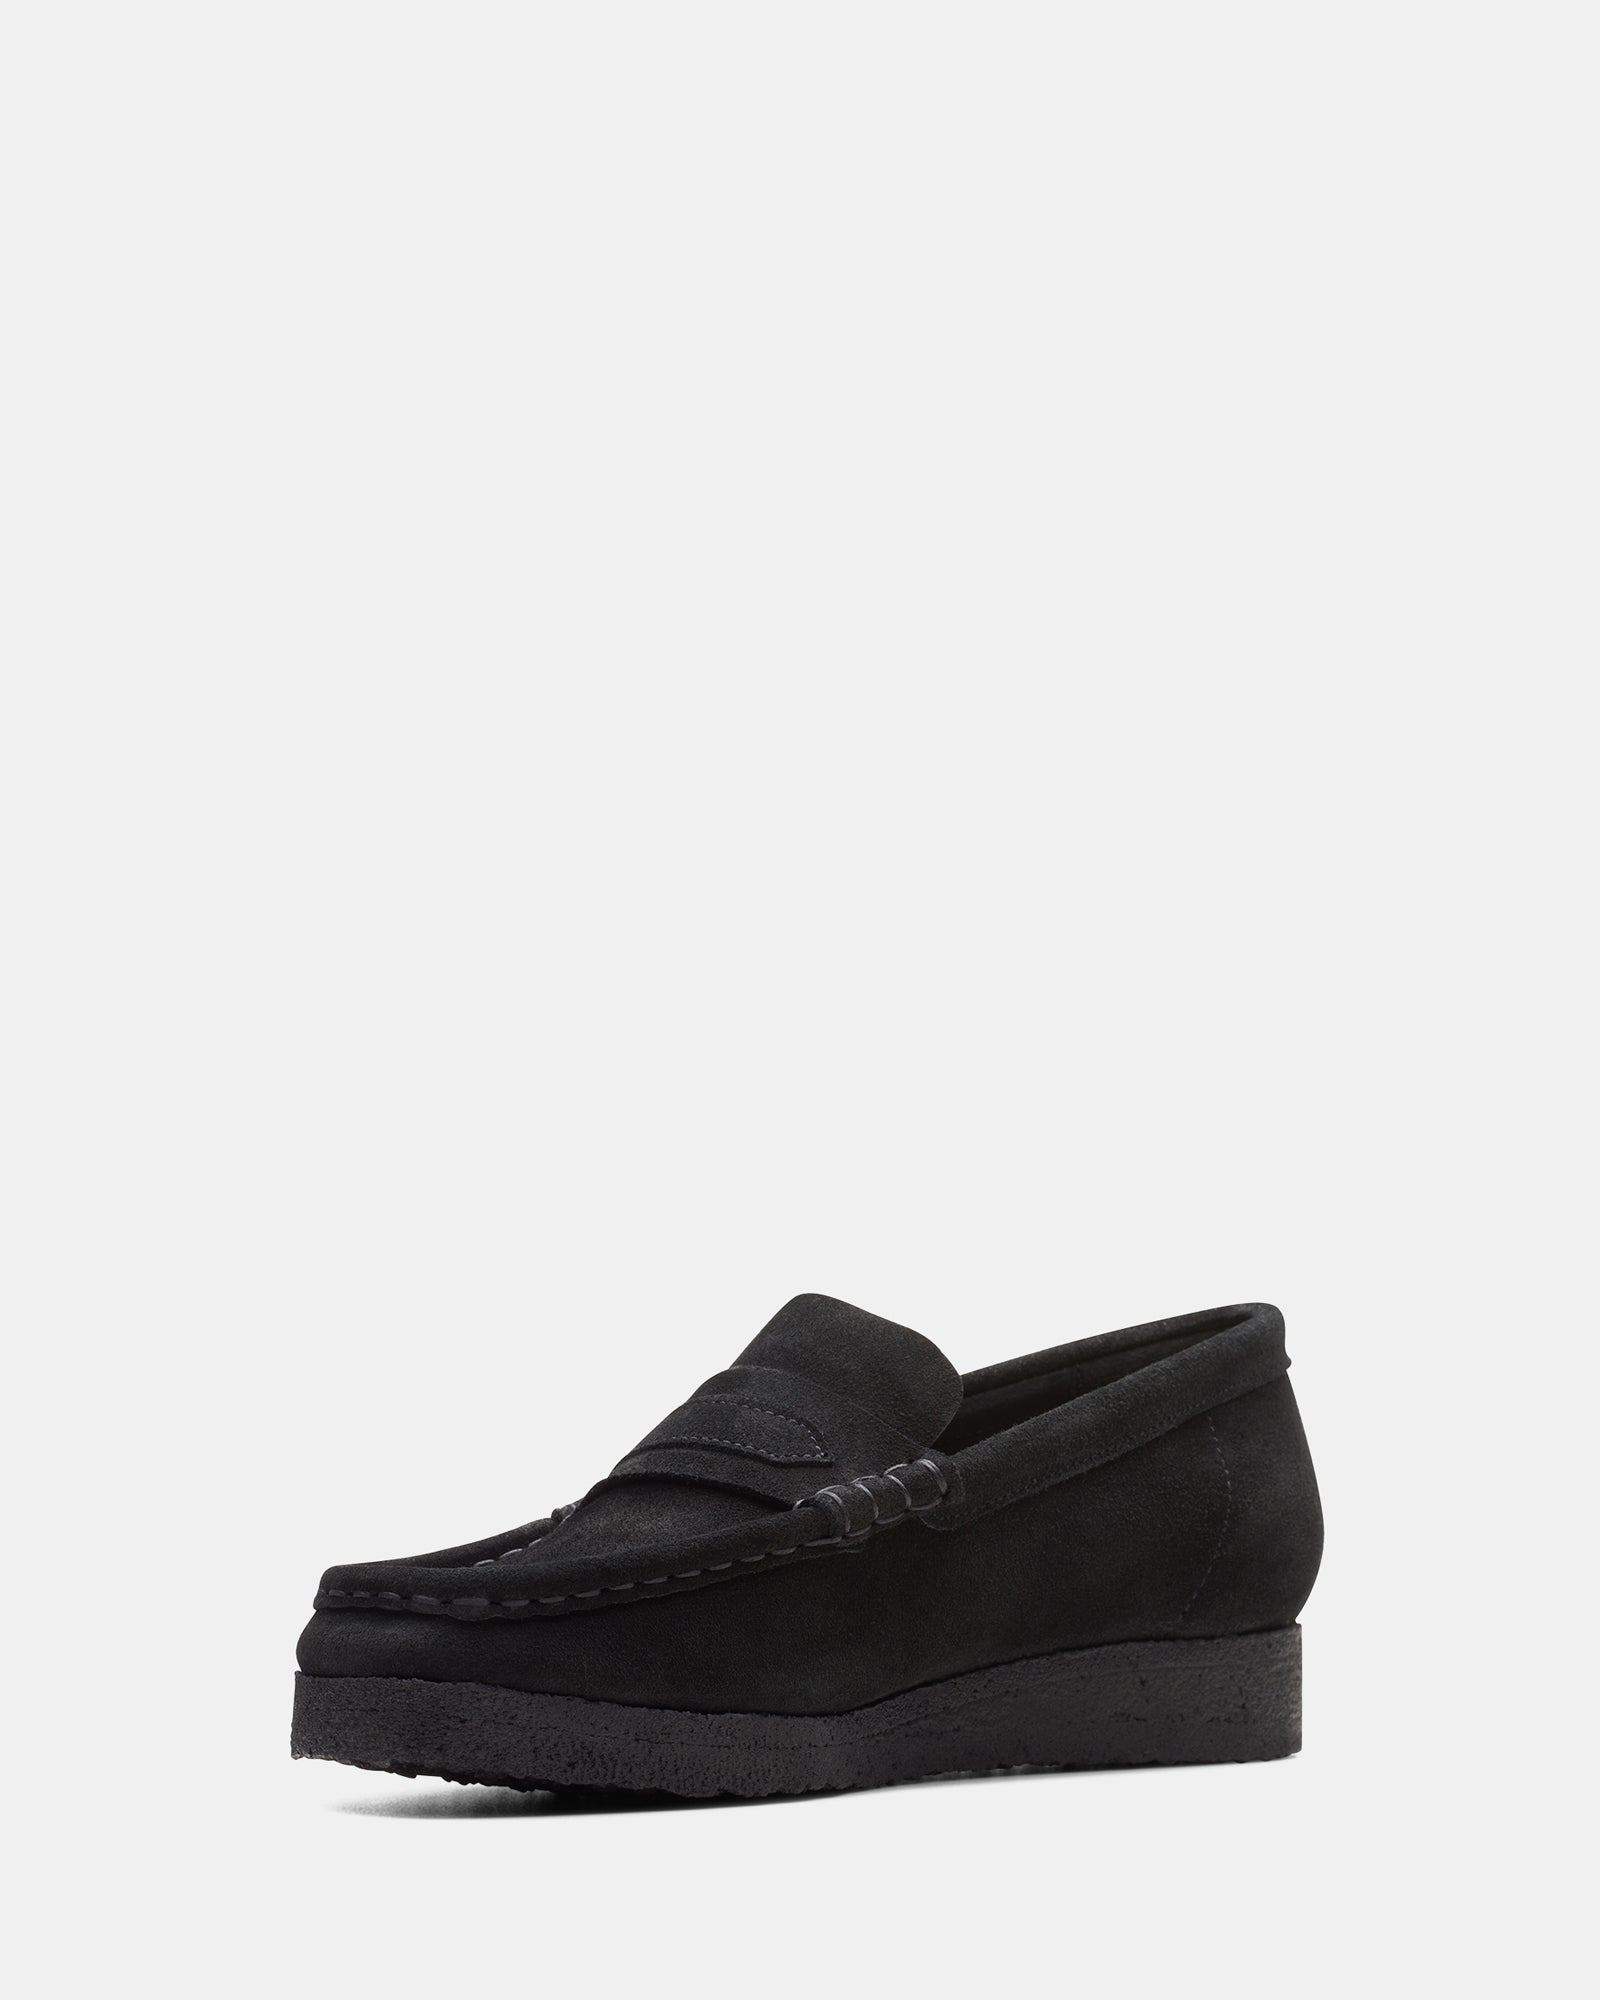 Wallabee Loafer Black Suede – Clarks